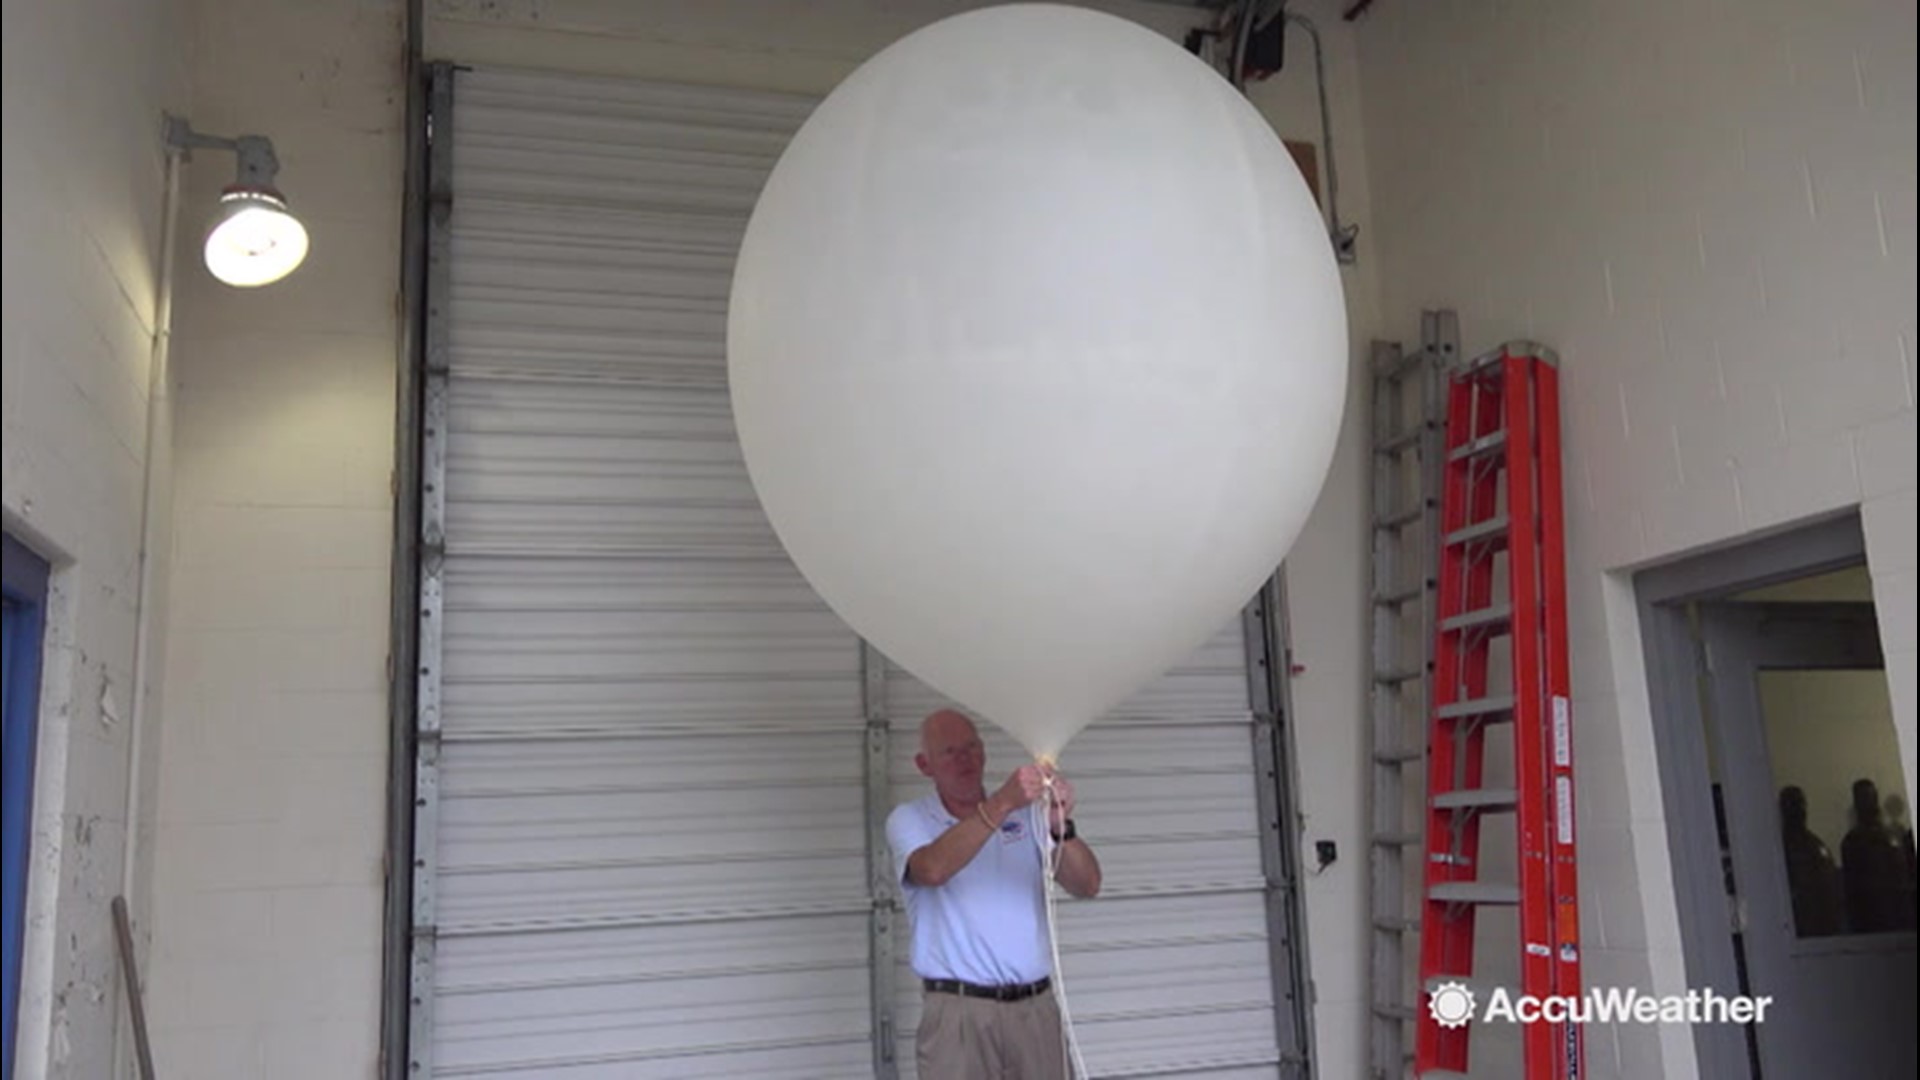 Weather balloons are used daily to send information on atmospheric pressure, temperature, humidity and wind speed. AccuWeather's Kena Vernon explains how this classic data gathering technique works.